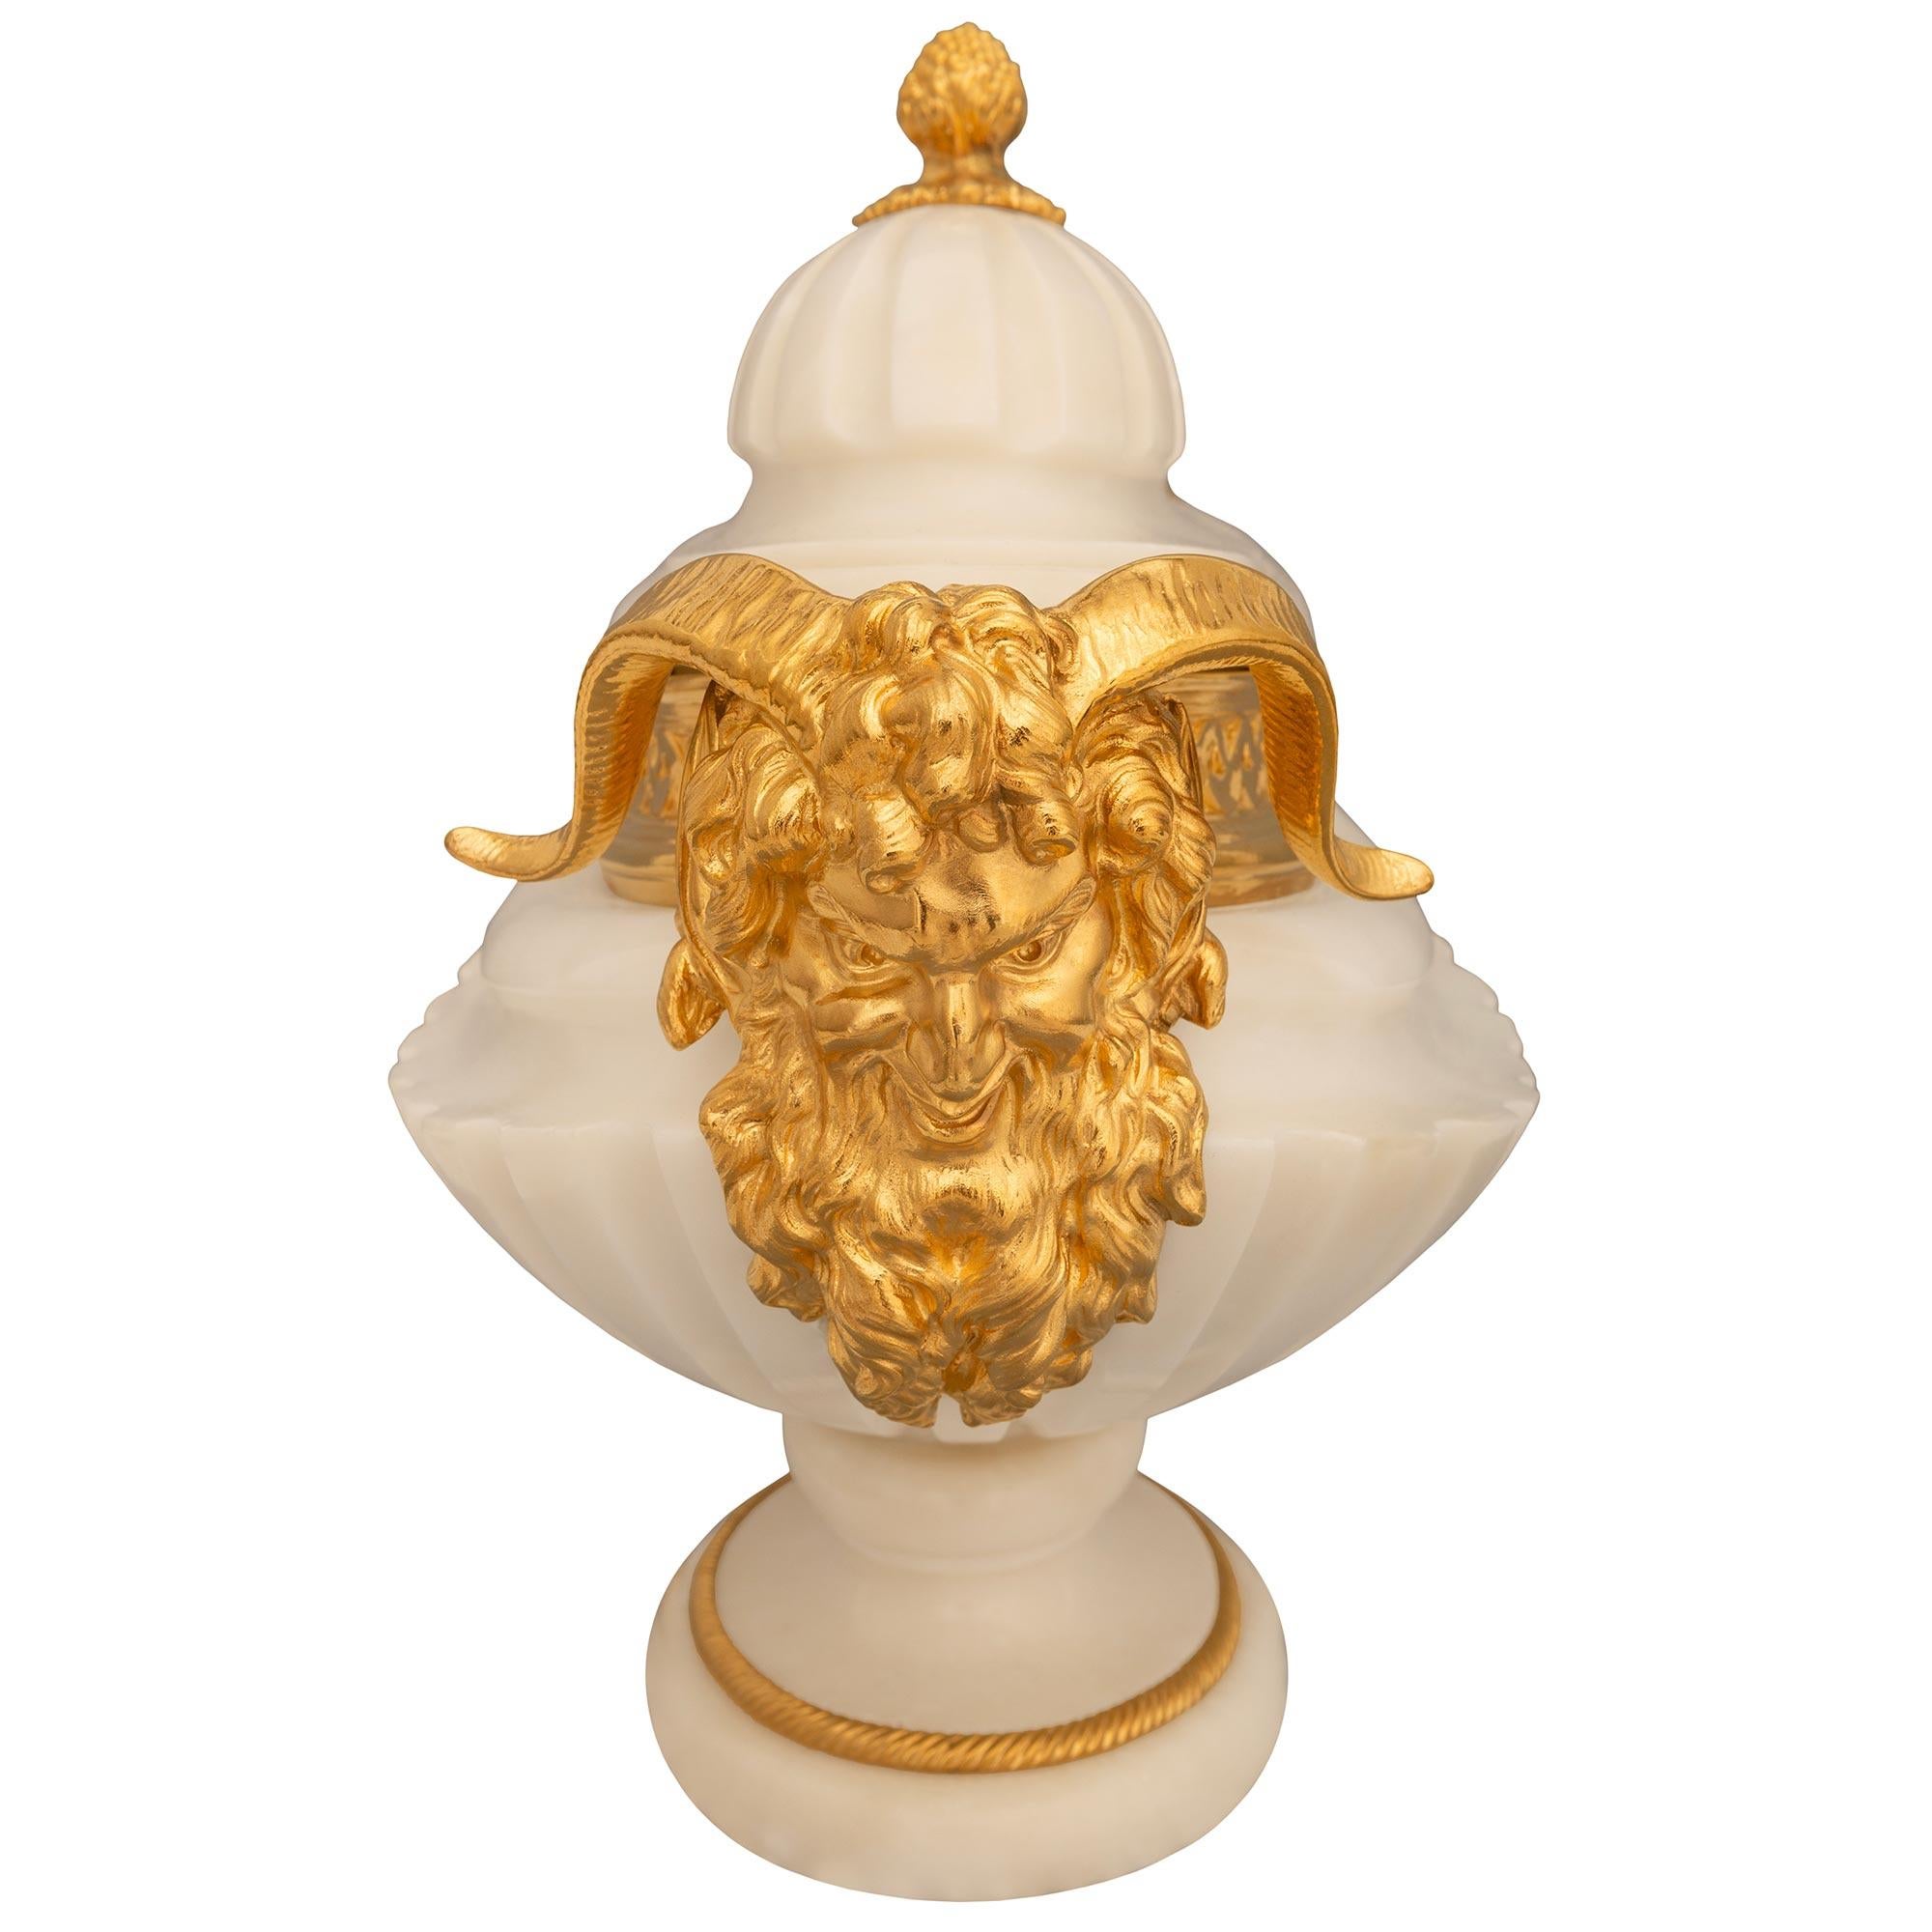 French 19th Century Louis XVI St. White Carrara Marble And Ormolu Lidded Urn For Sale 1